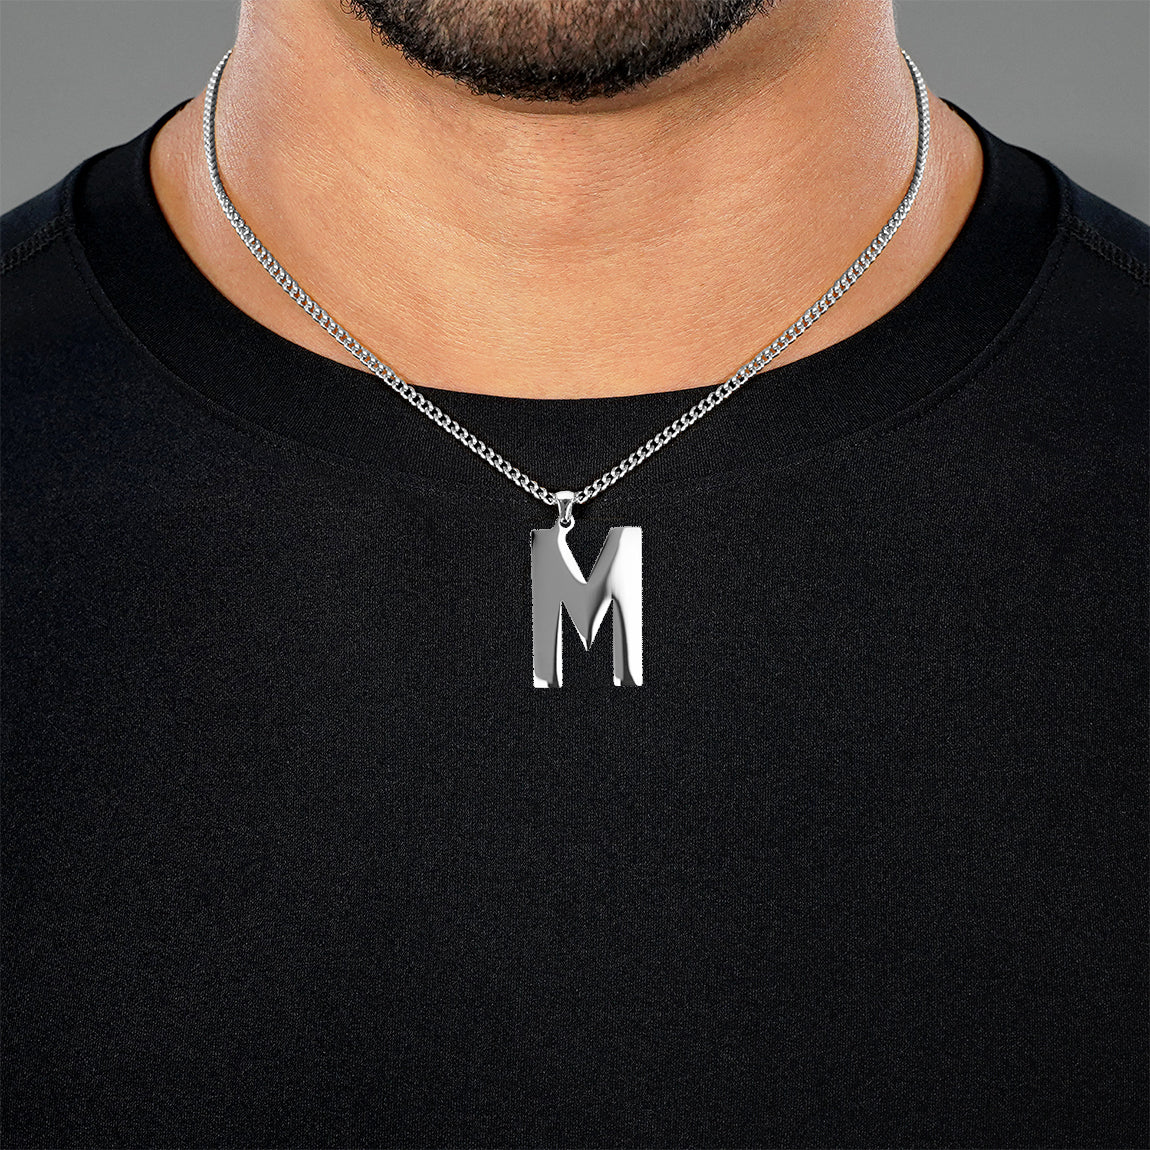 M Letter Pendant with Chain Necklace - Stainless Steel